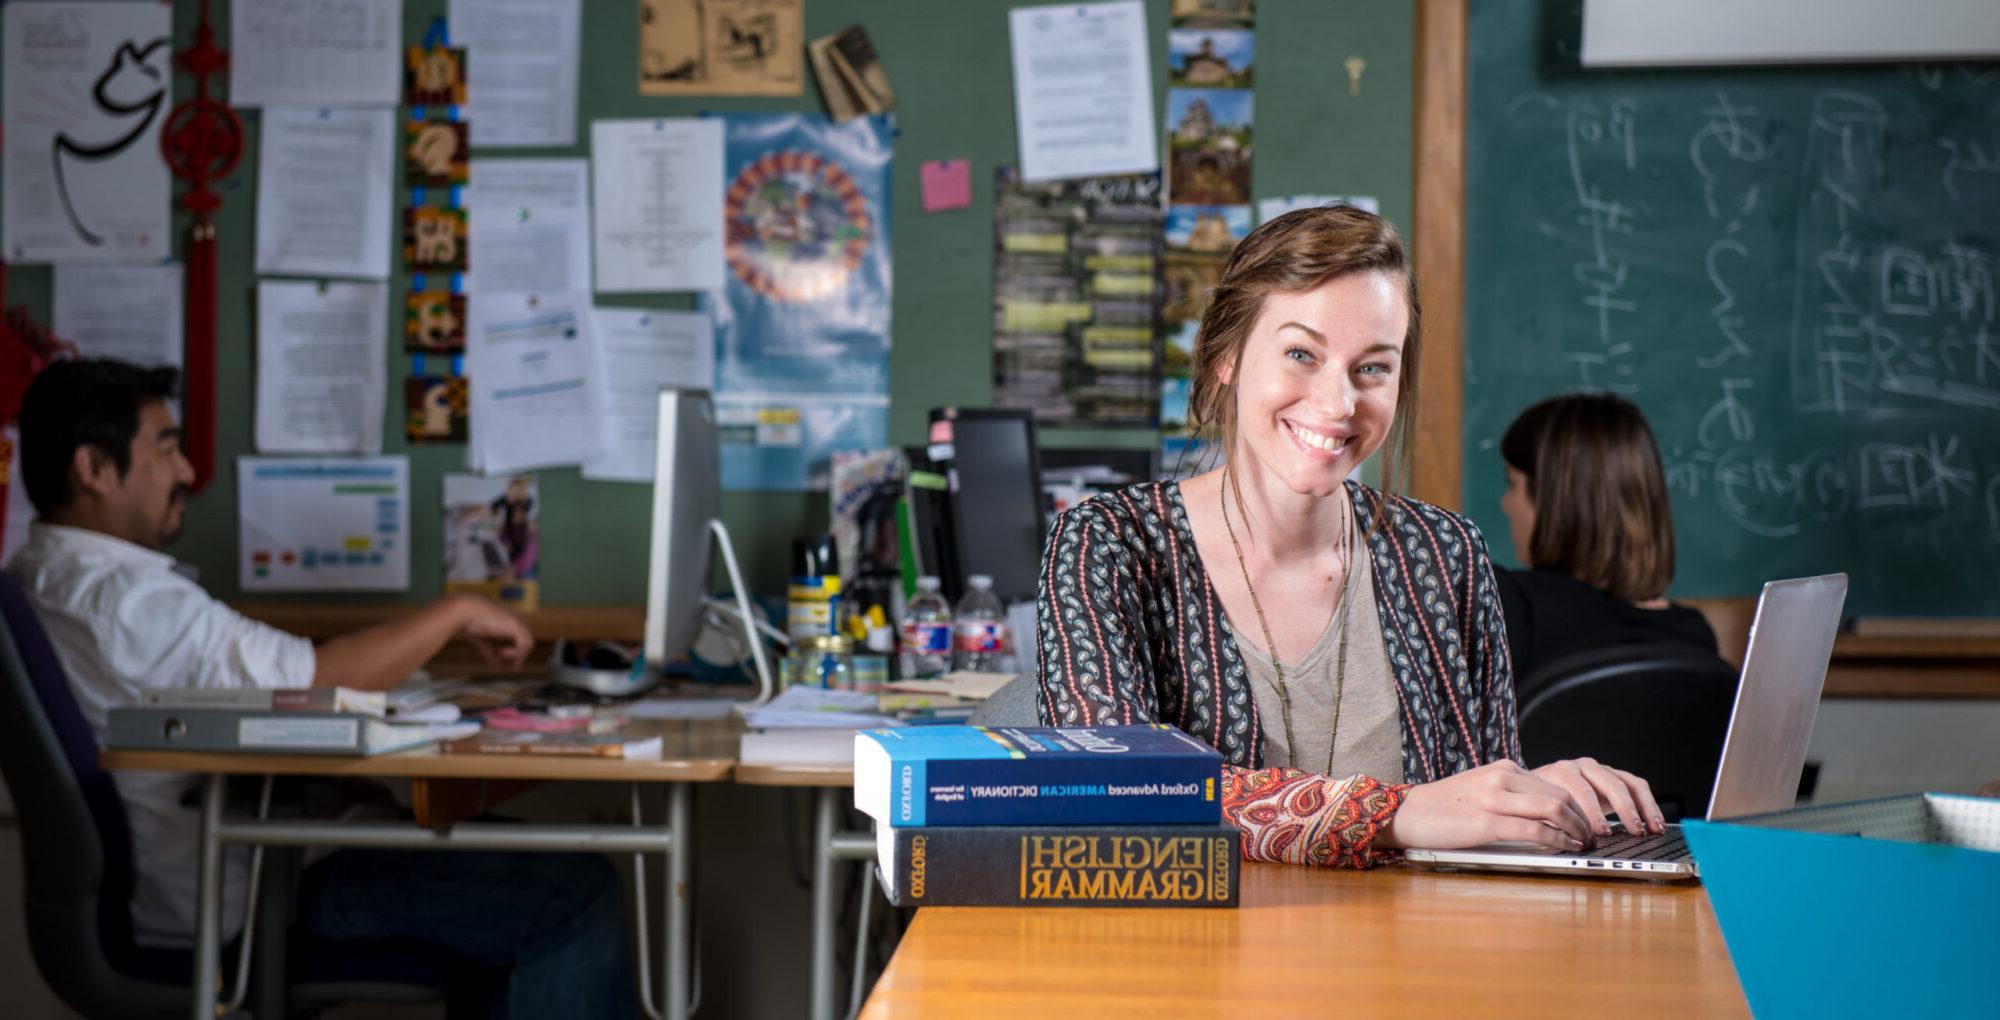 Young woman smiling at desk with laptop and English grammar books